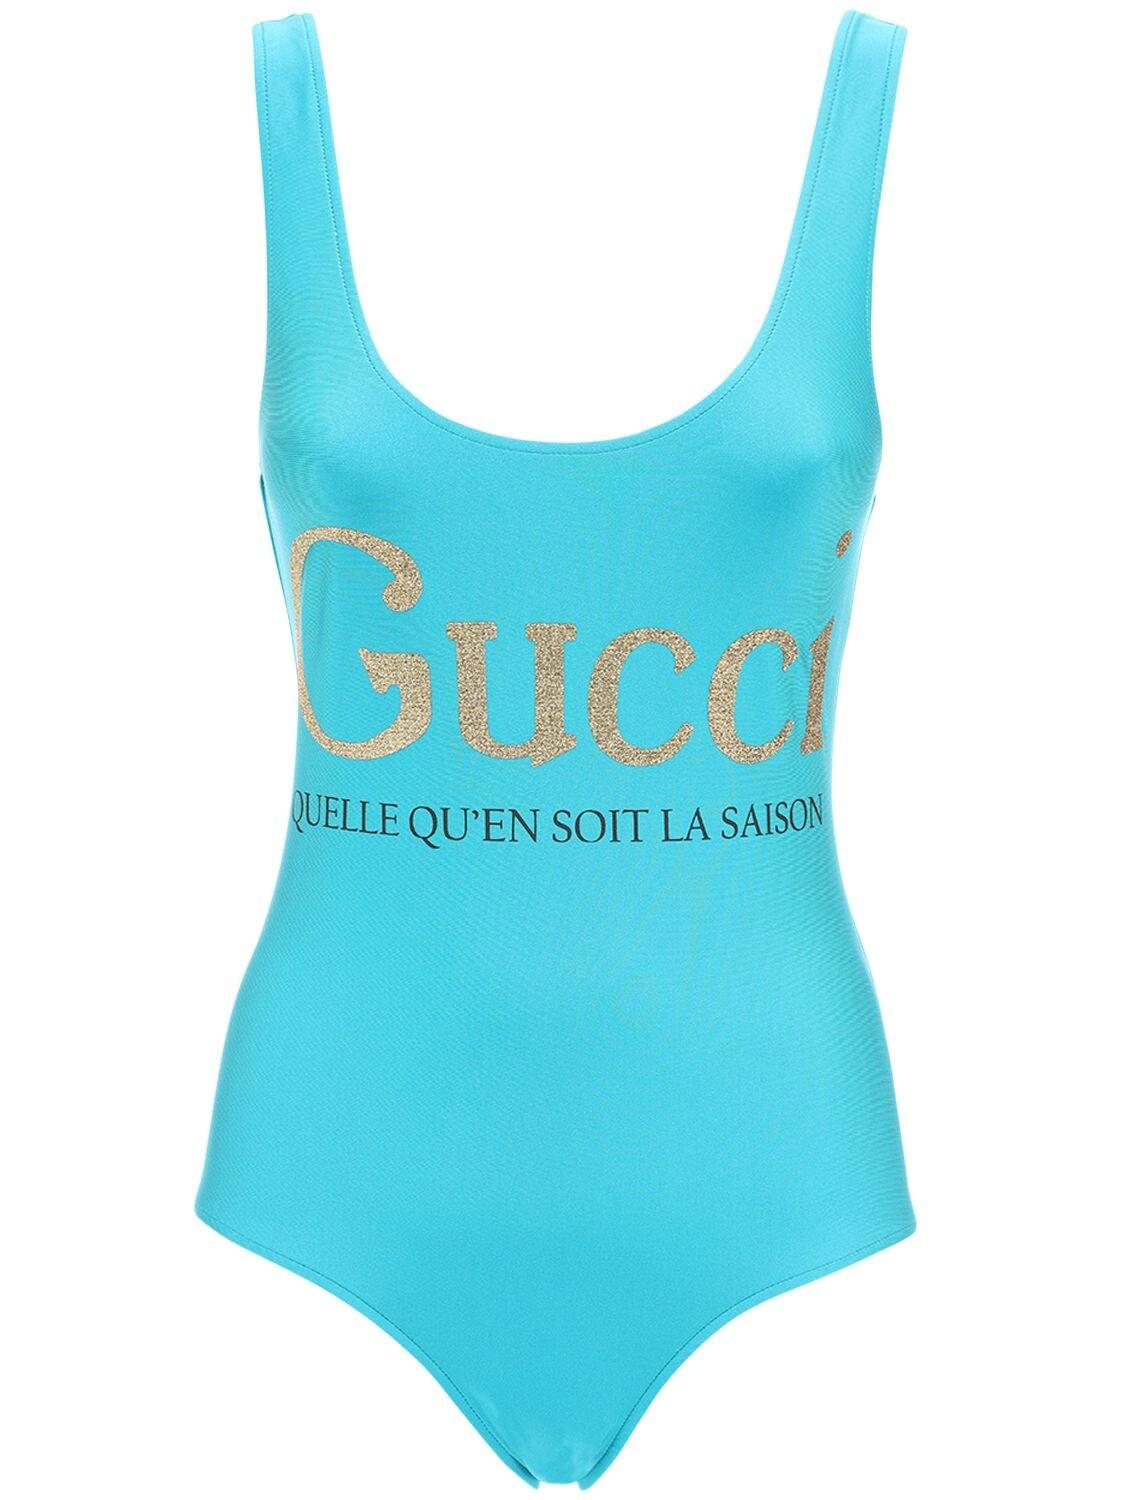 Gucci Logo Print One Piece Swimsuit in Blue/Gold (Blue) - Lyst